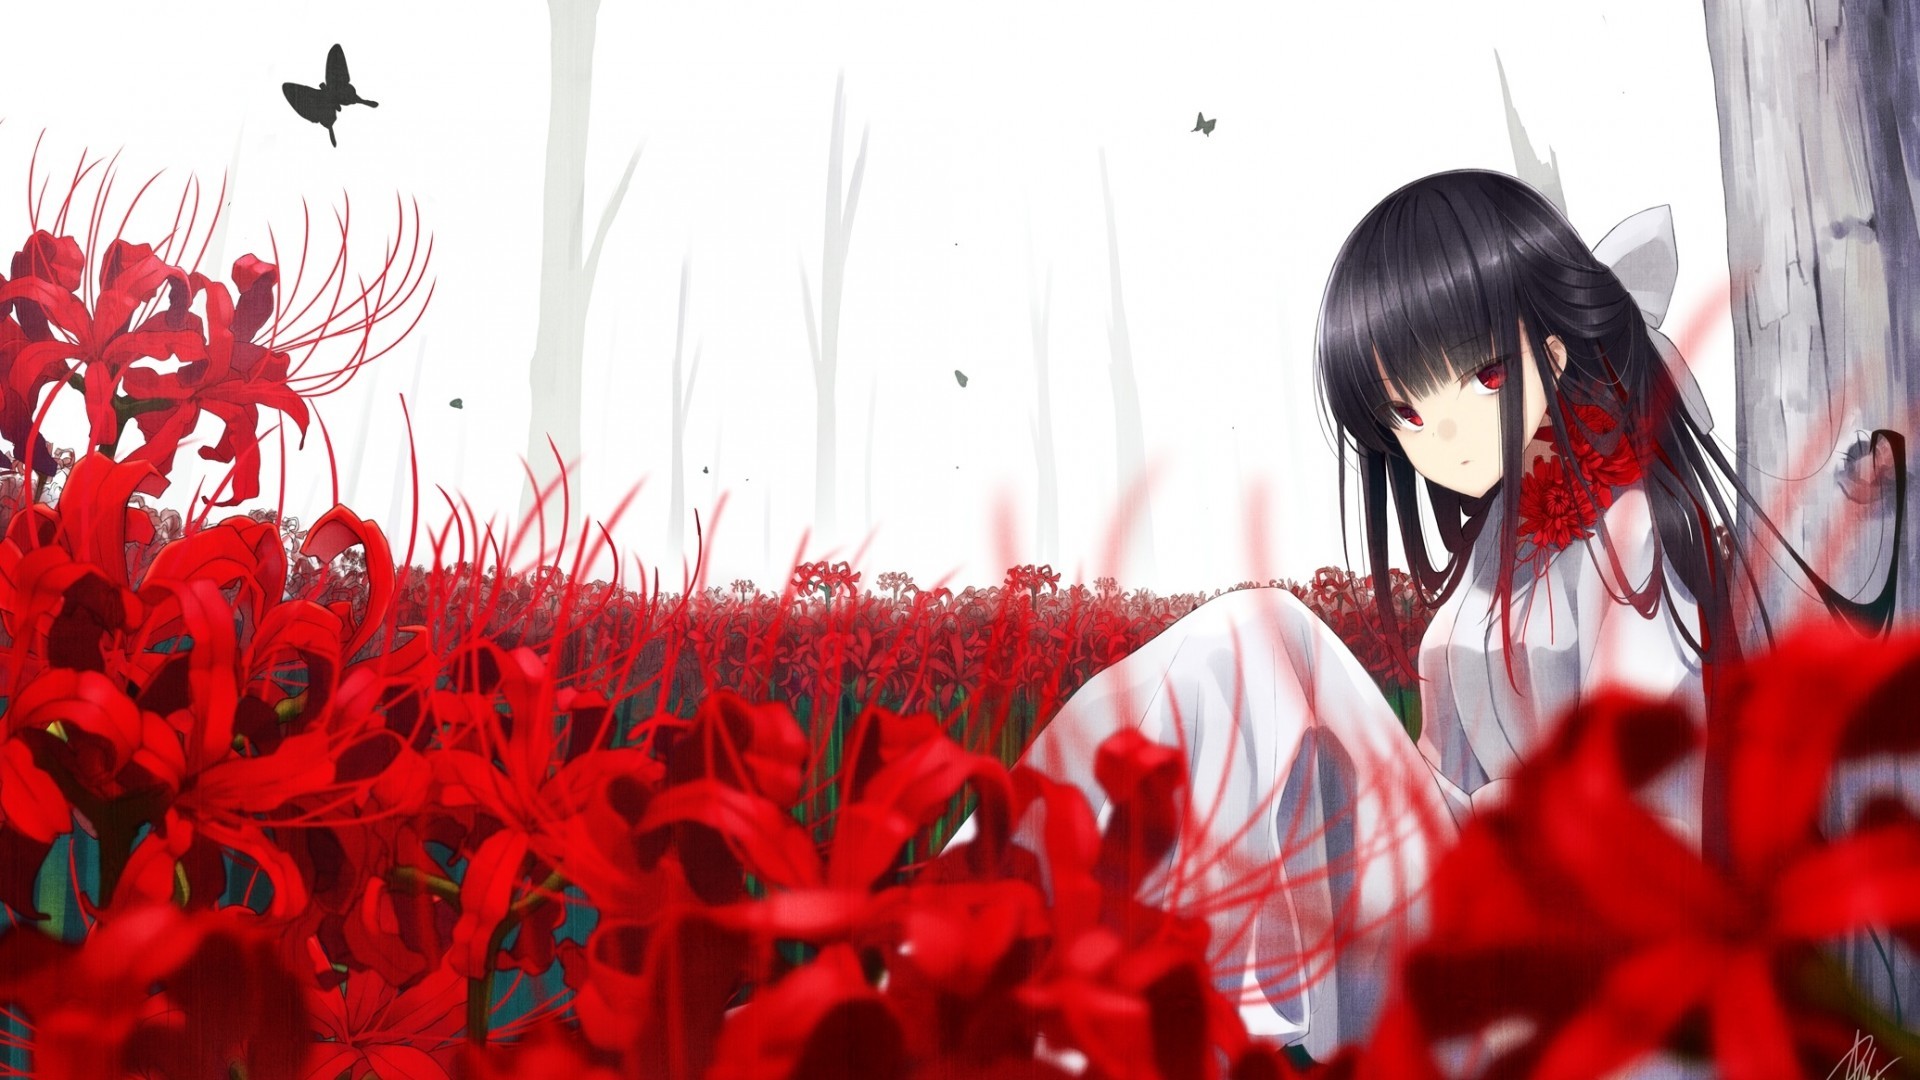 Free download Red Eyes Anime Girl Butterfly Flowers Black Hair Red And [1920x1080] for your Desktop, Mobile & Tablet. Explore Red and Black Anime Girl Wallpaper. Red And Black